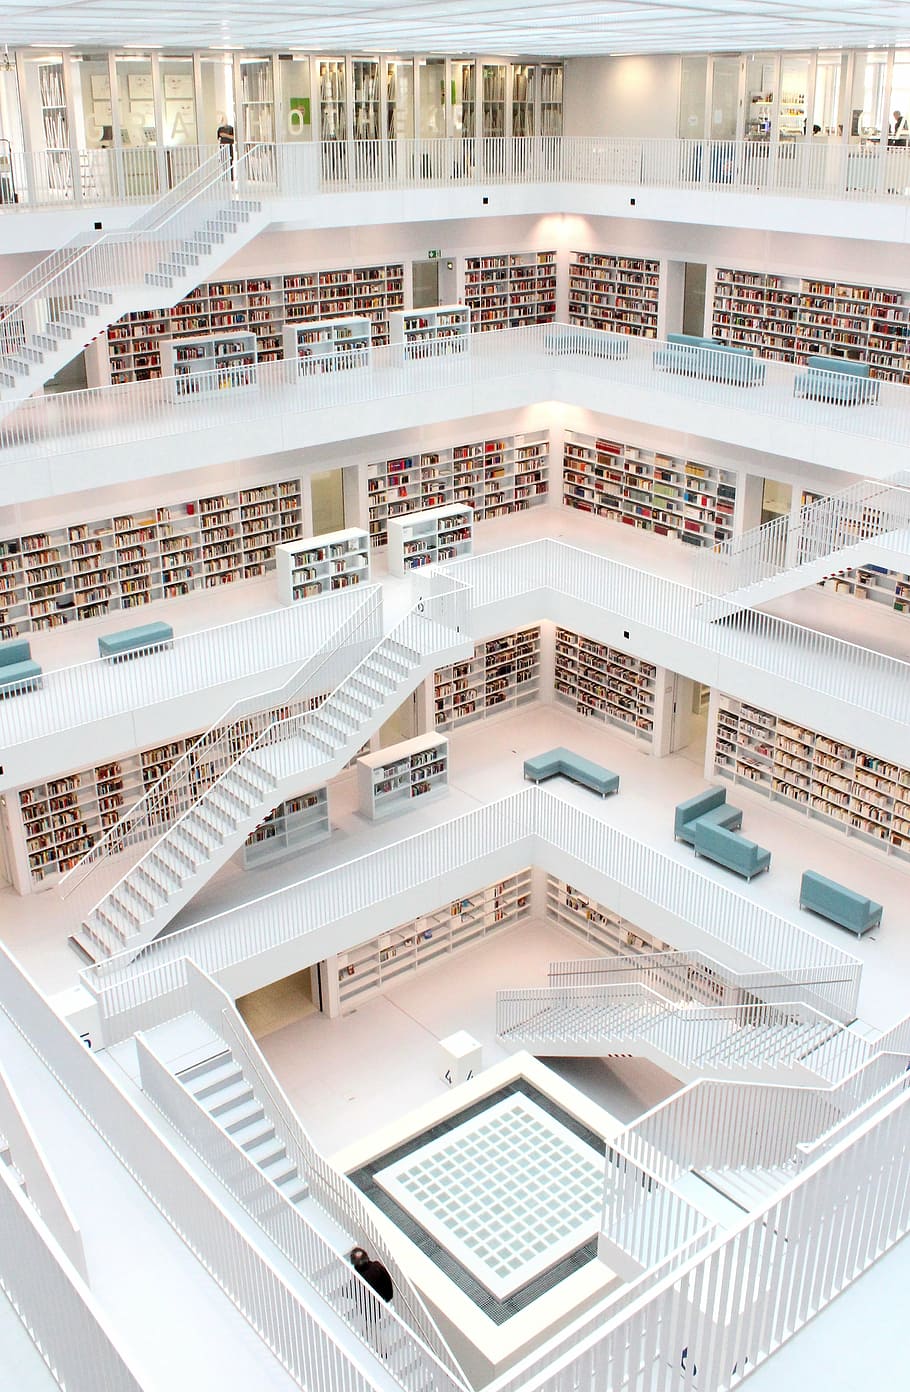 white, indoor, building perspective, library, architecture, stuttgart, modern, know, study, learn